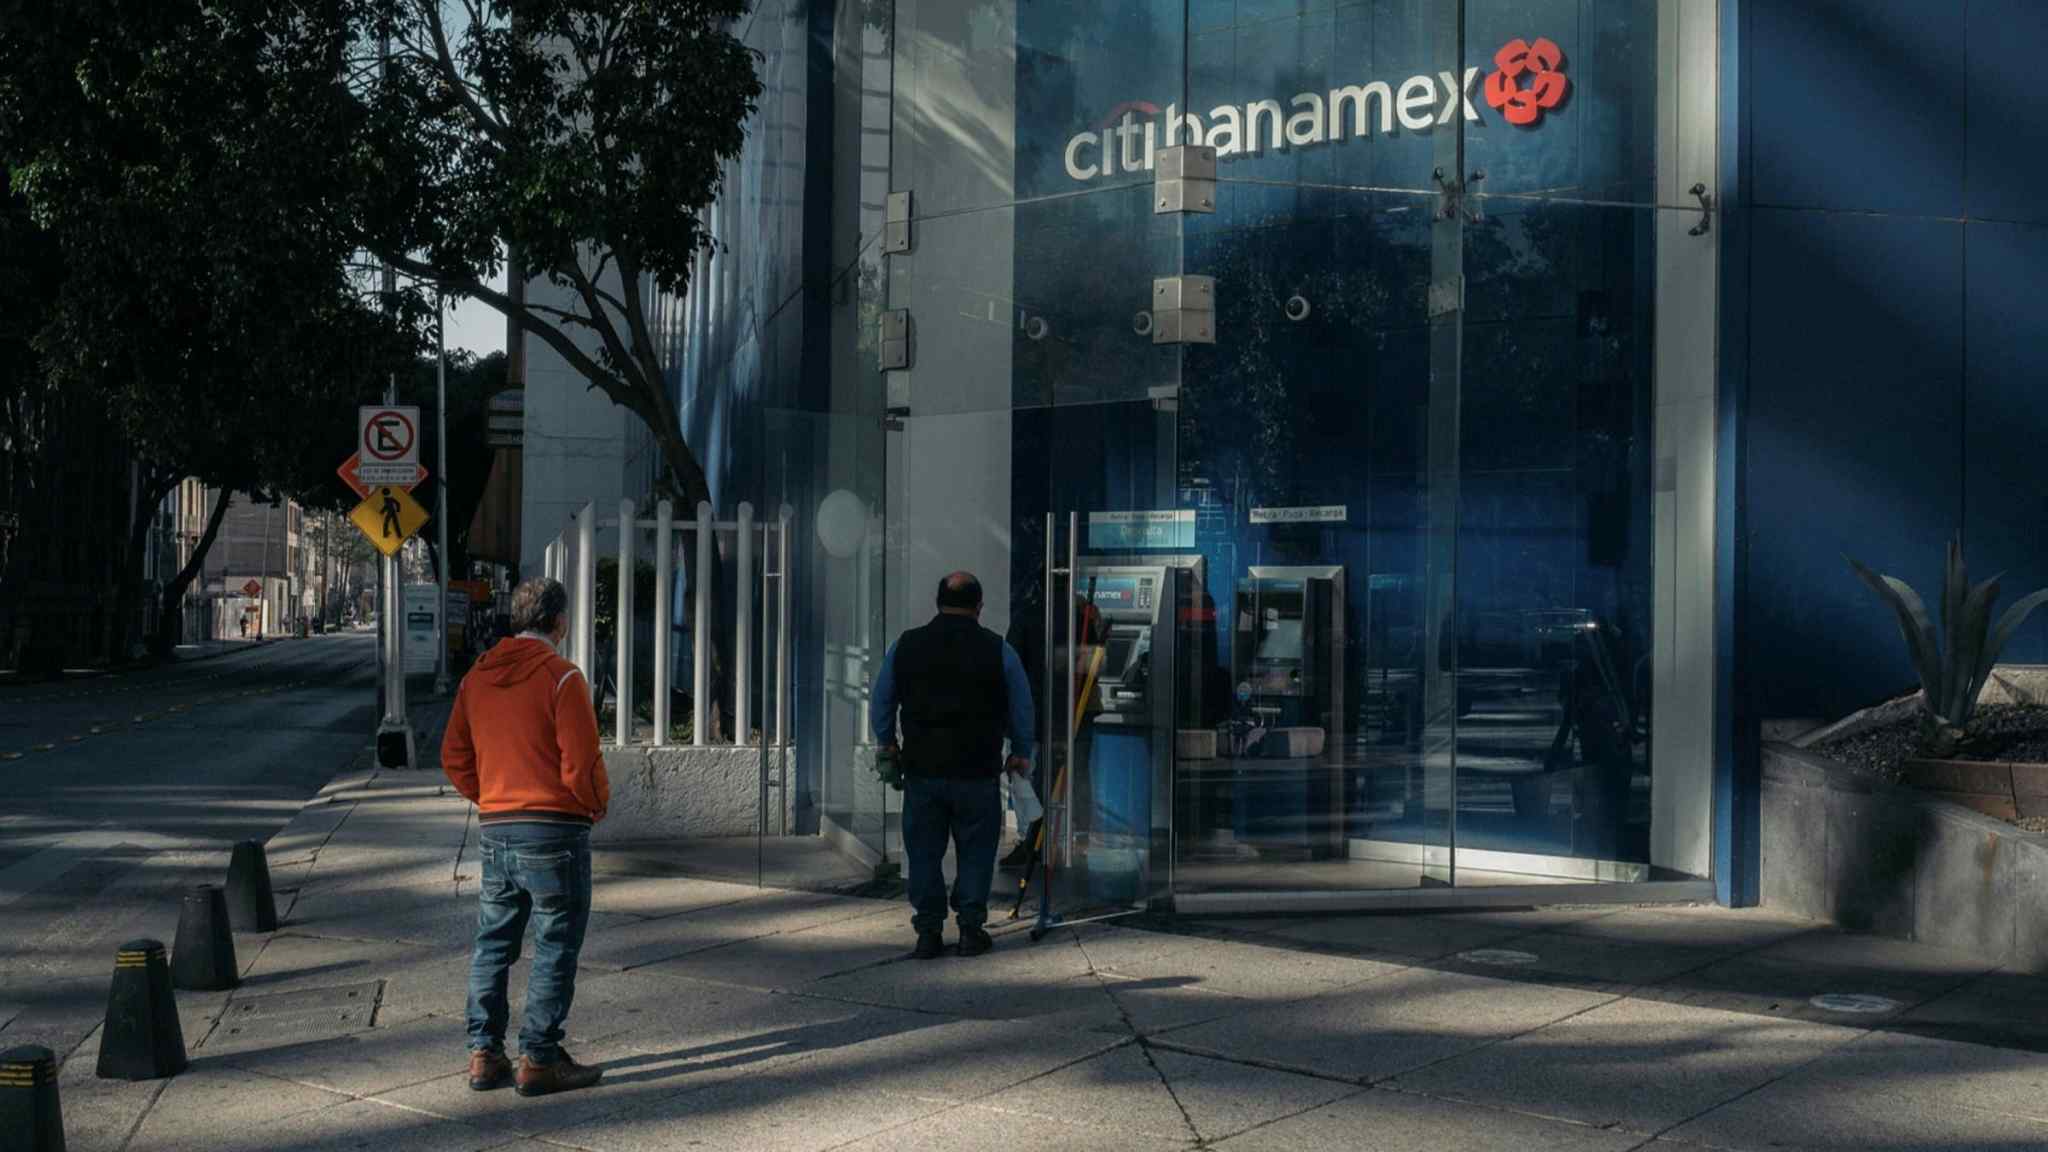 Citi’s retail banking exit from Mexico a test of president’s nationalism